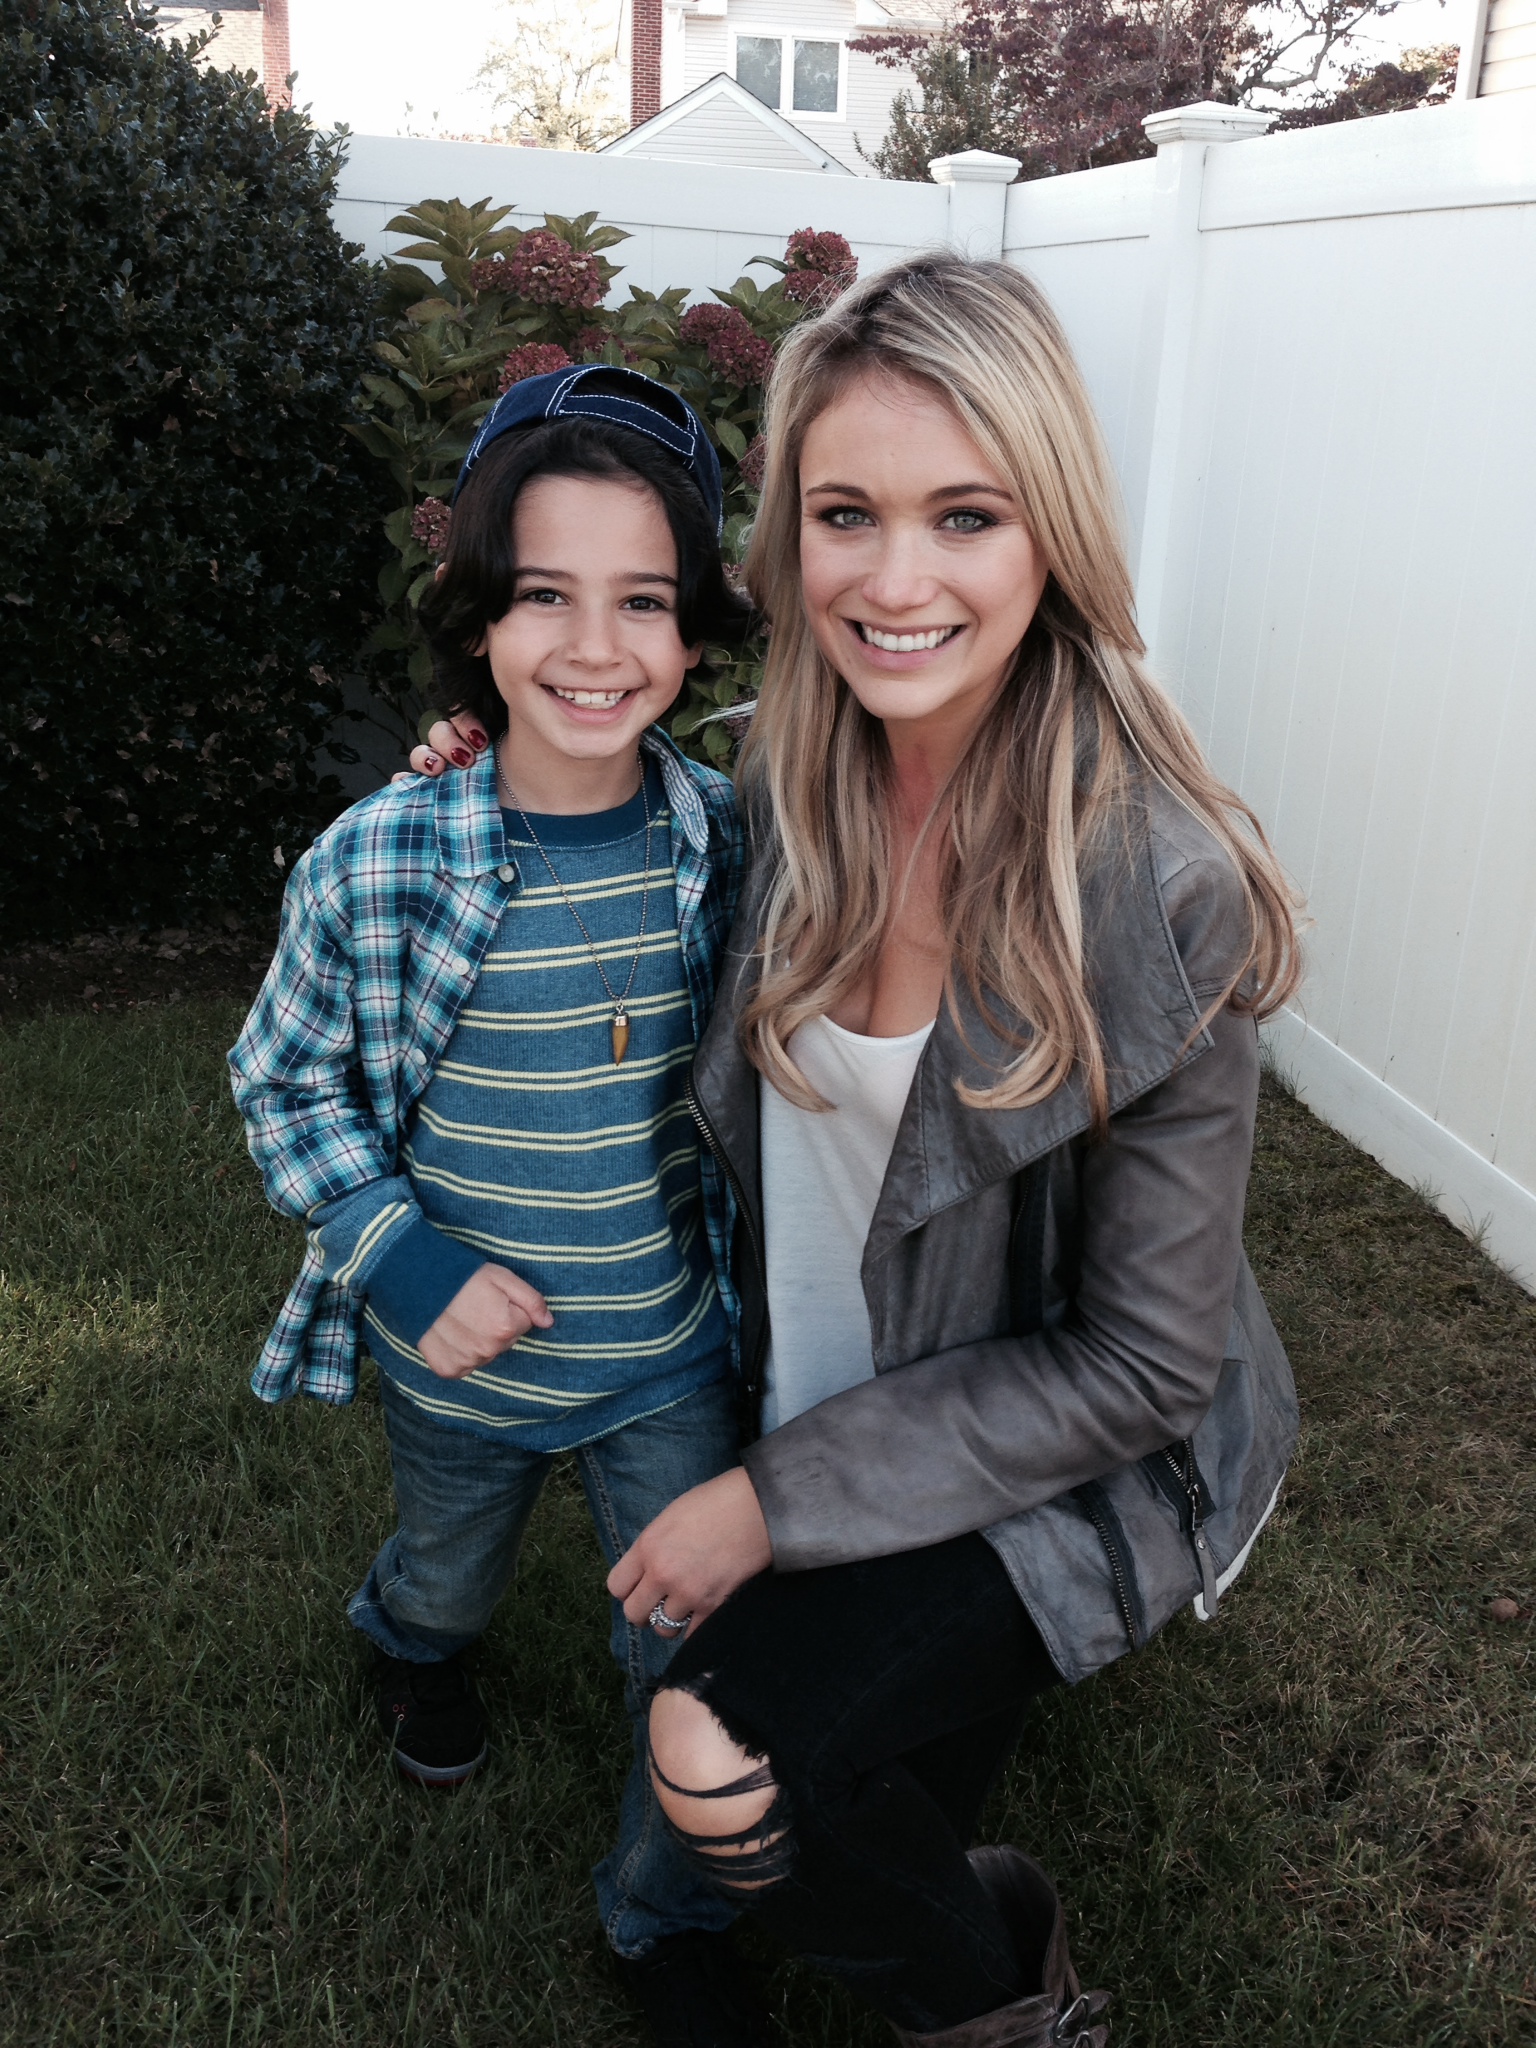 Jesse with Katrina Bowden while they were working on the set of the movie Hard Sell.